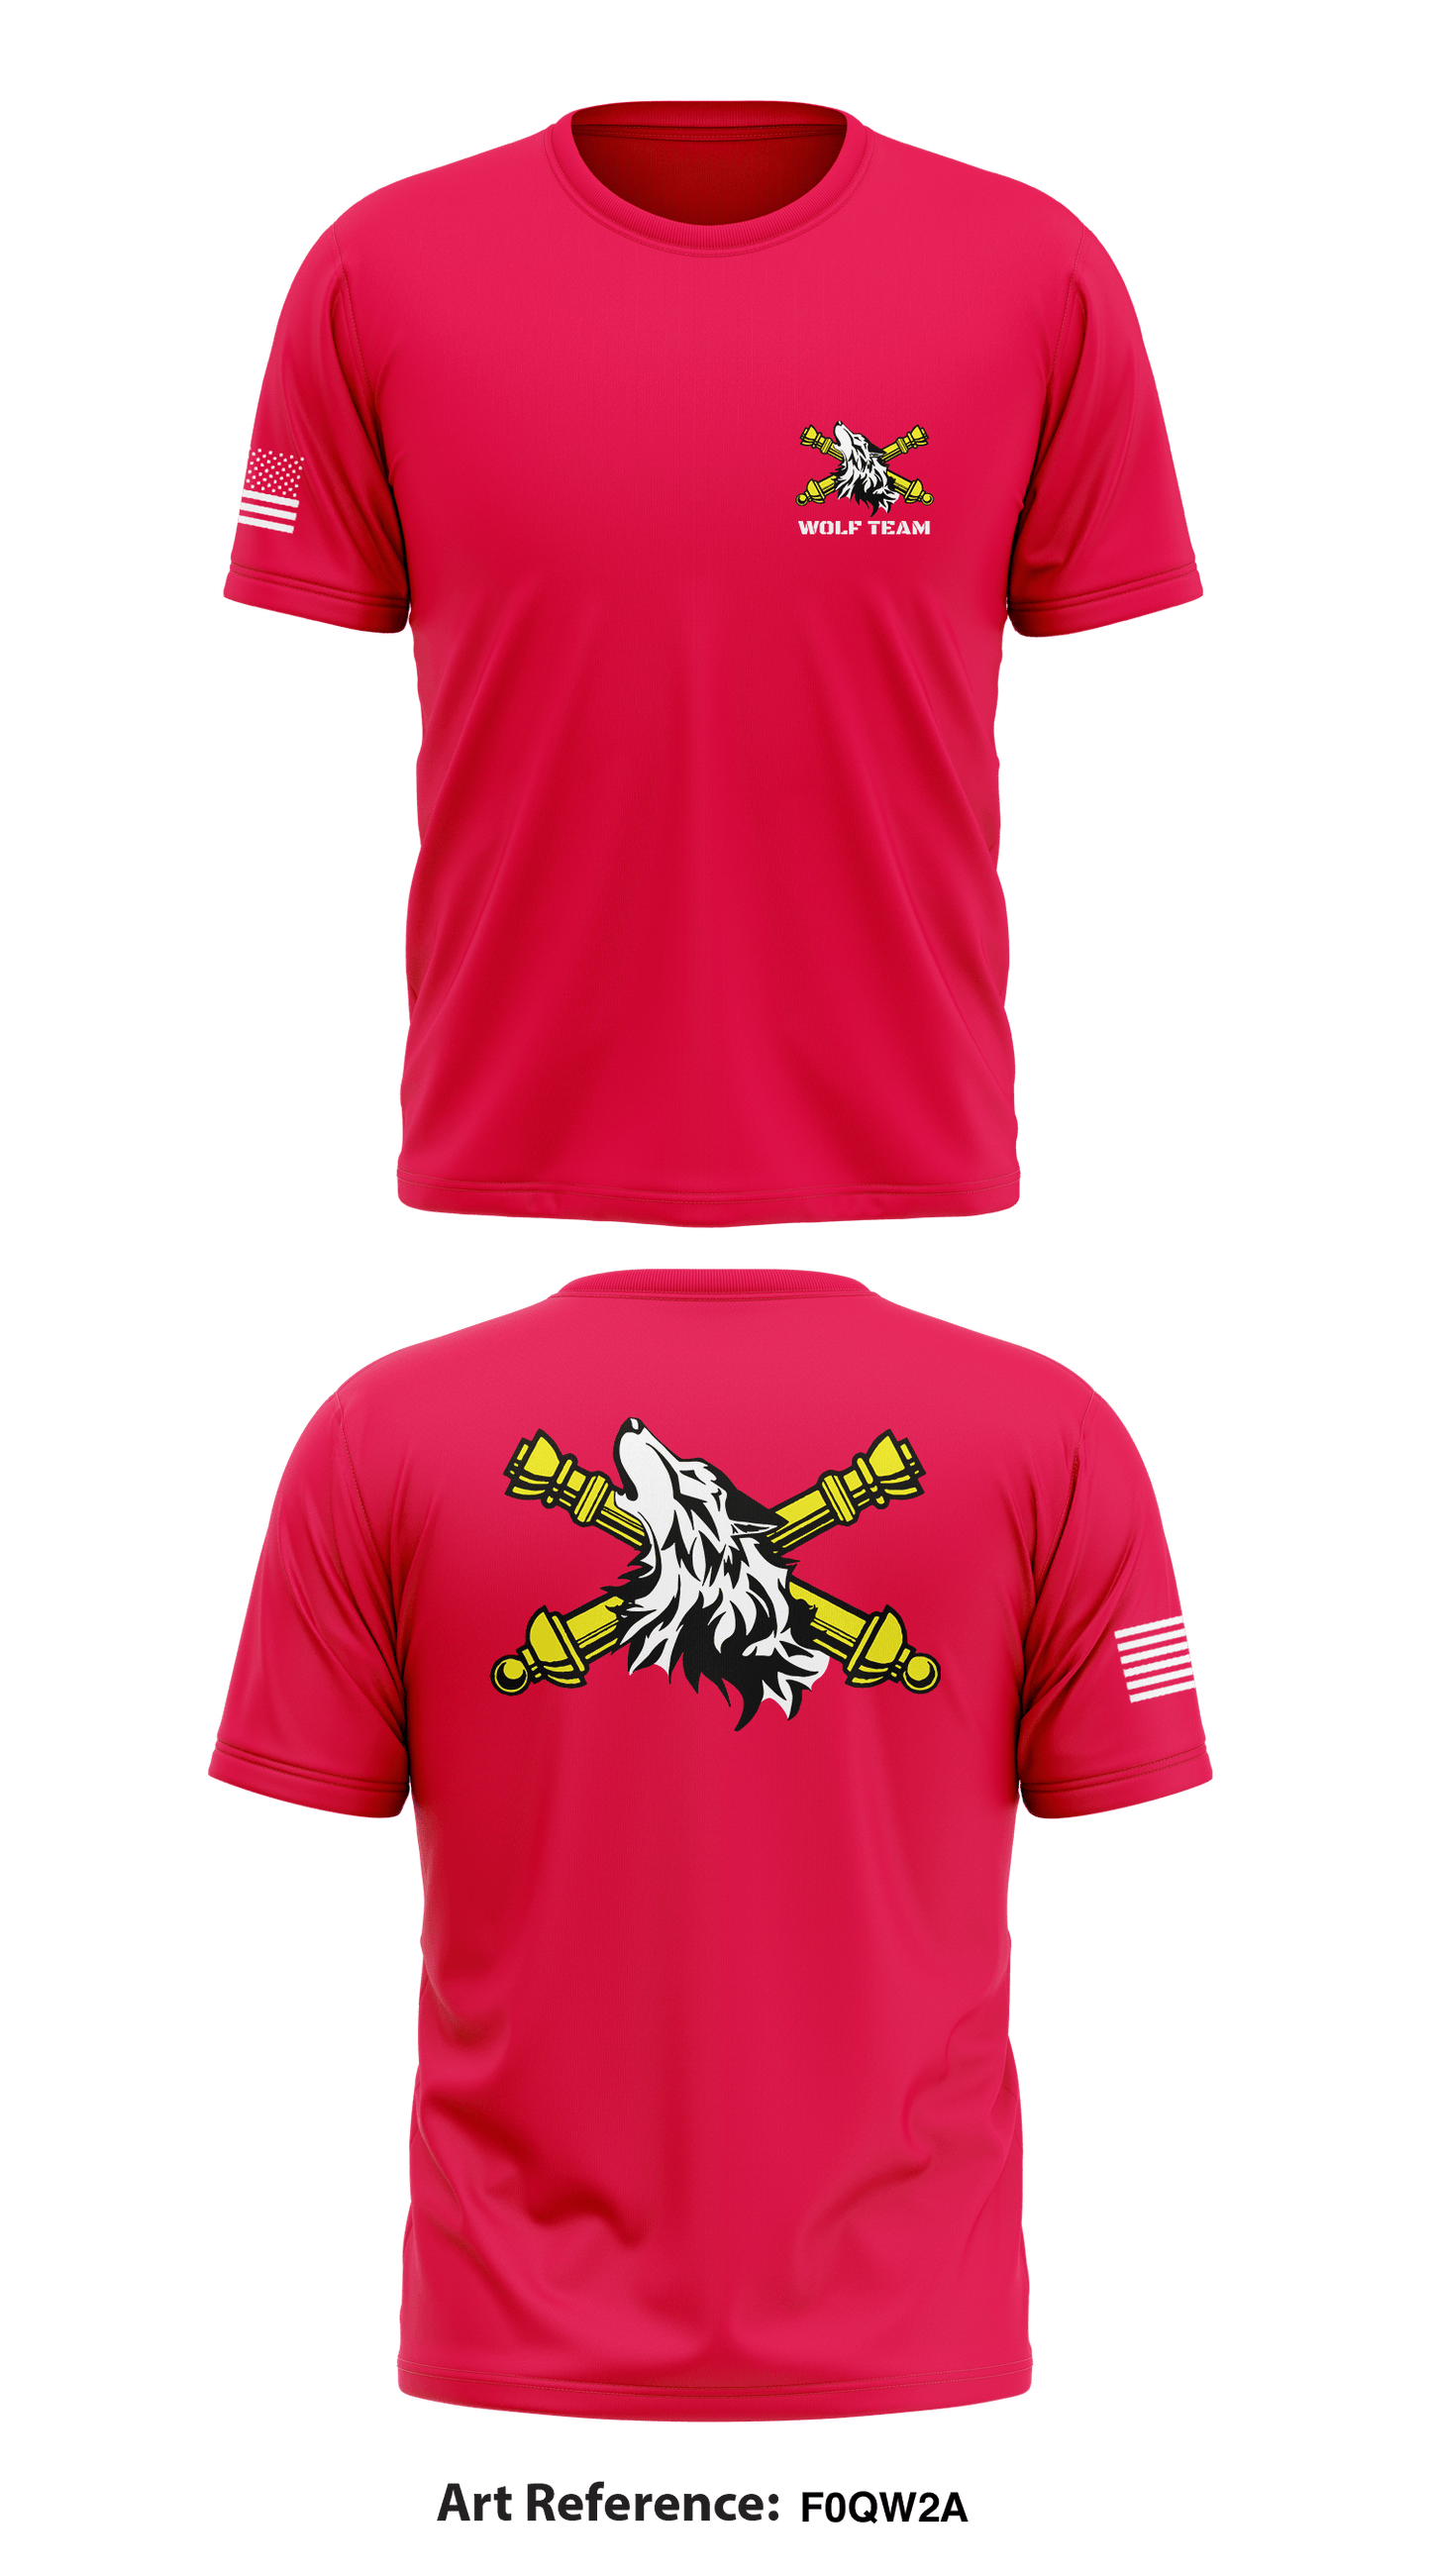 Wolf Team, OPS GRP, NTC Store 1 Core Men's SS Performance Tee - f0qw2a